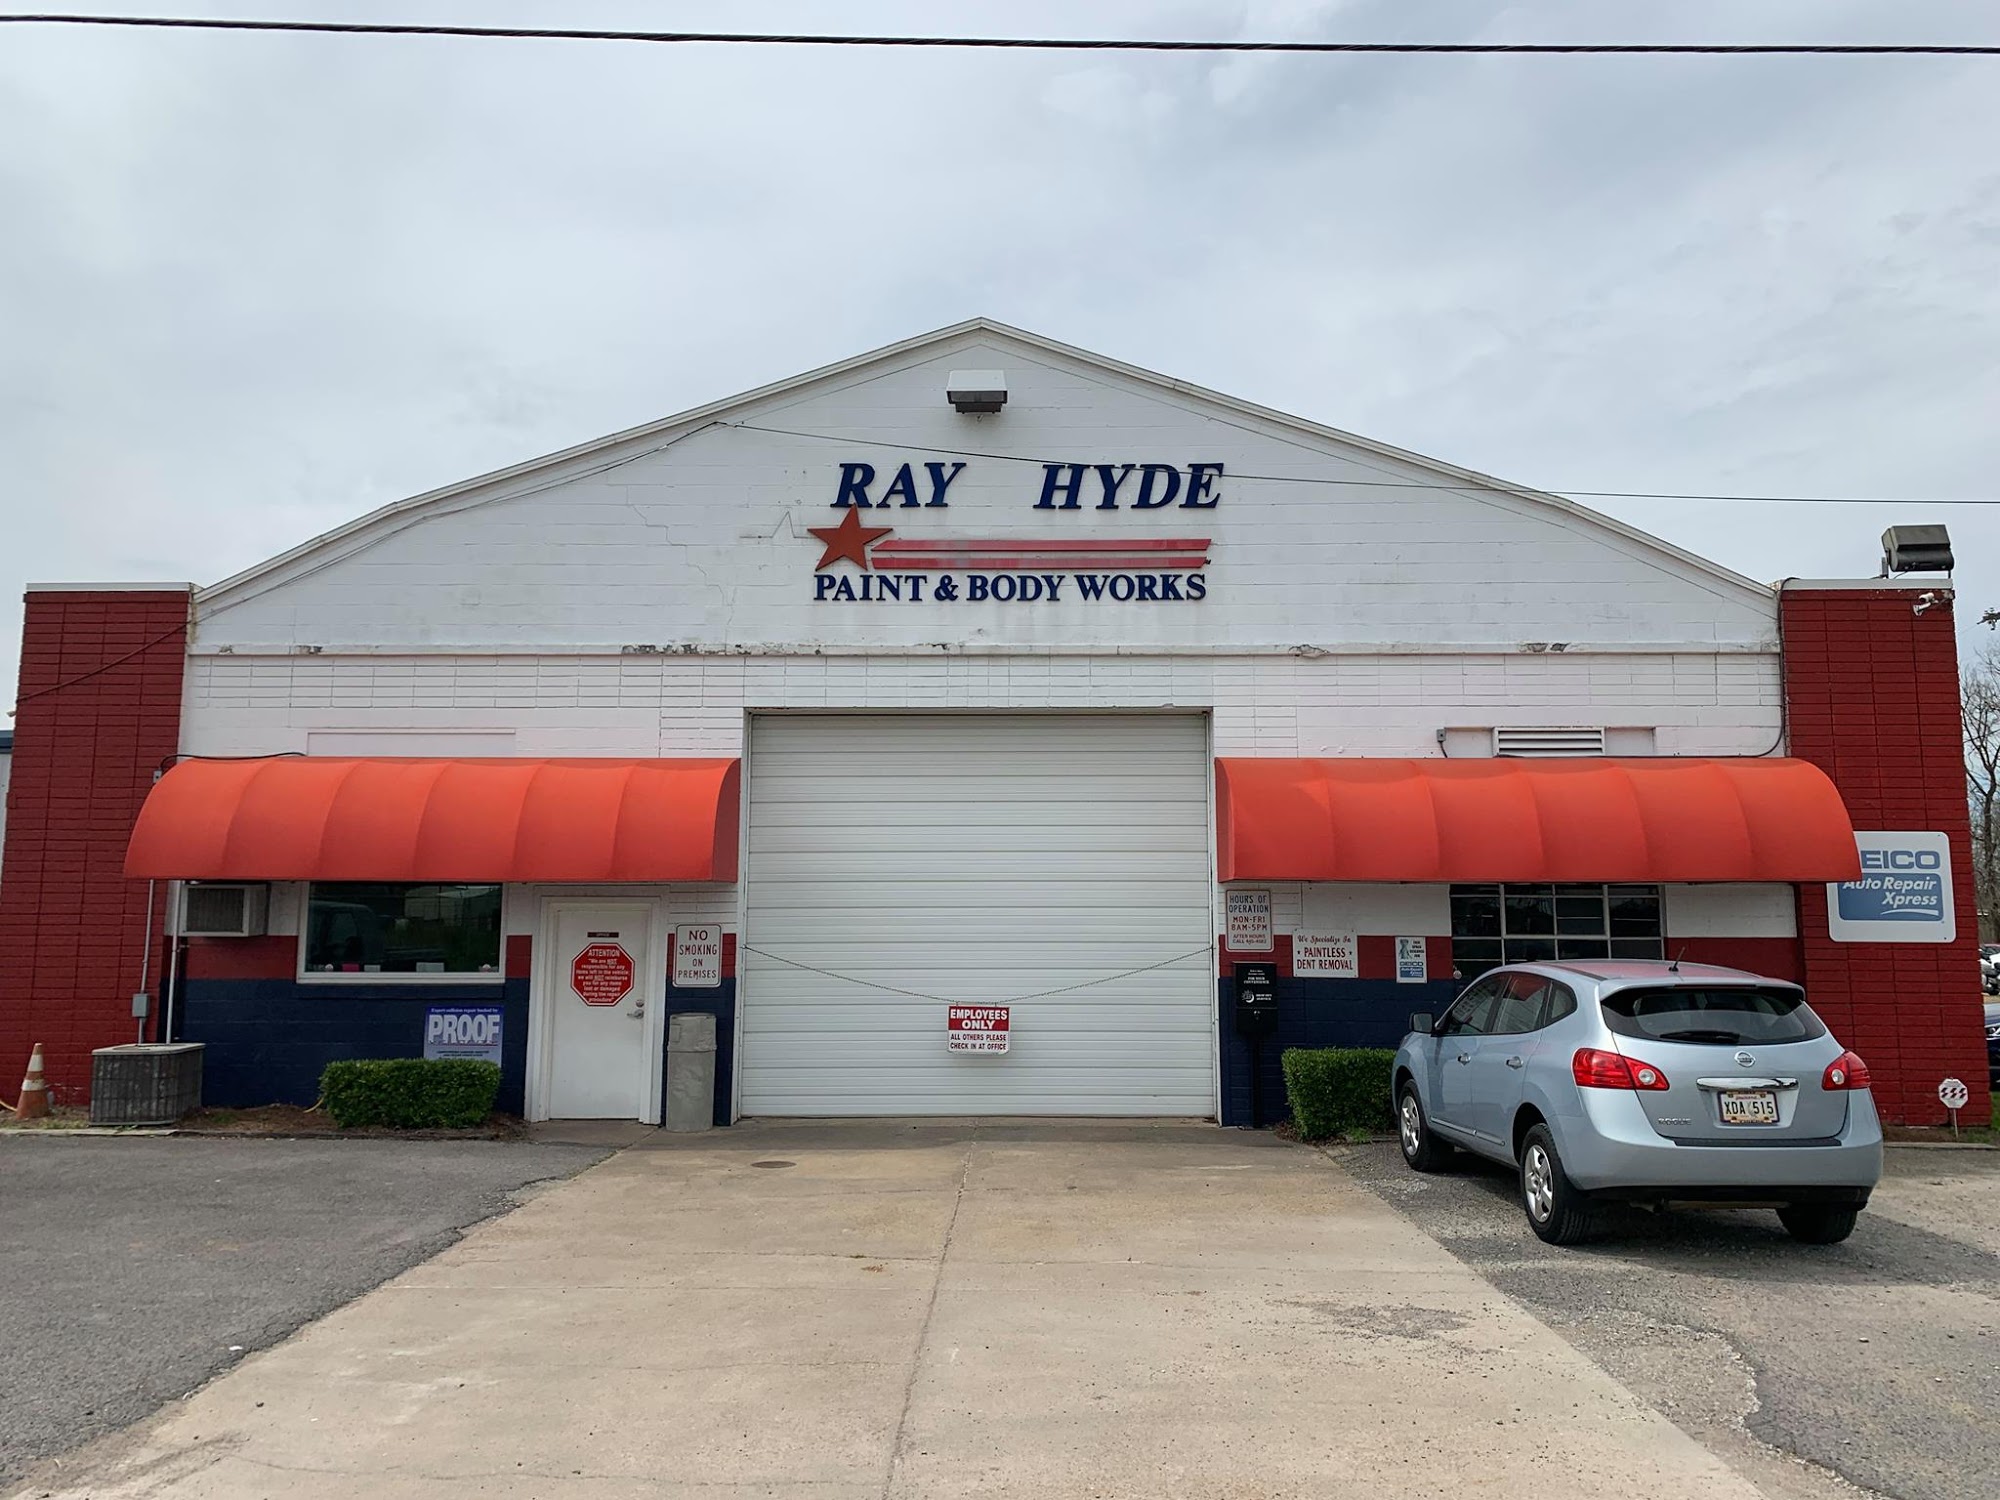 Ray Hyde Paint & Body Works